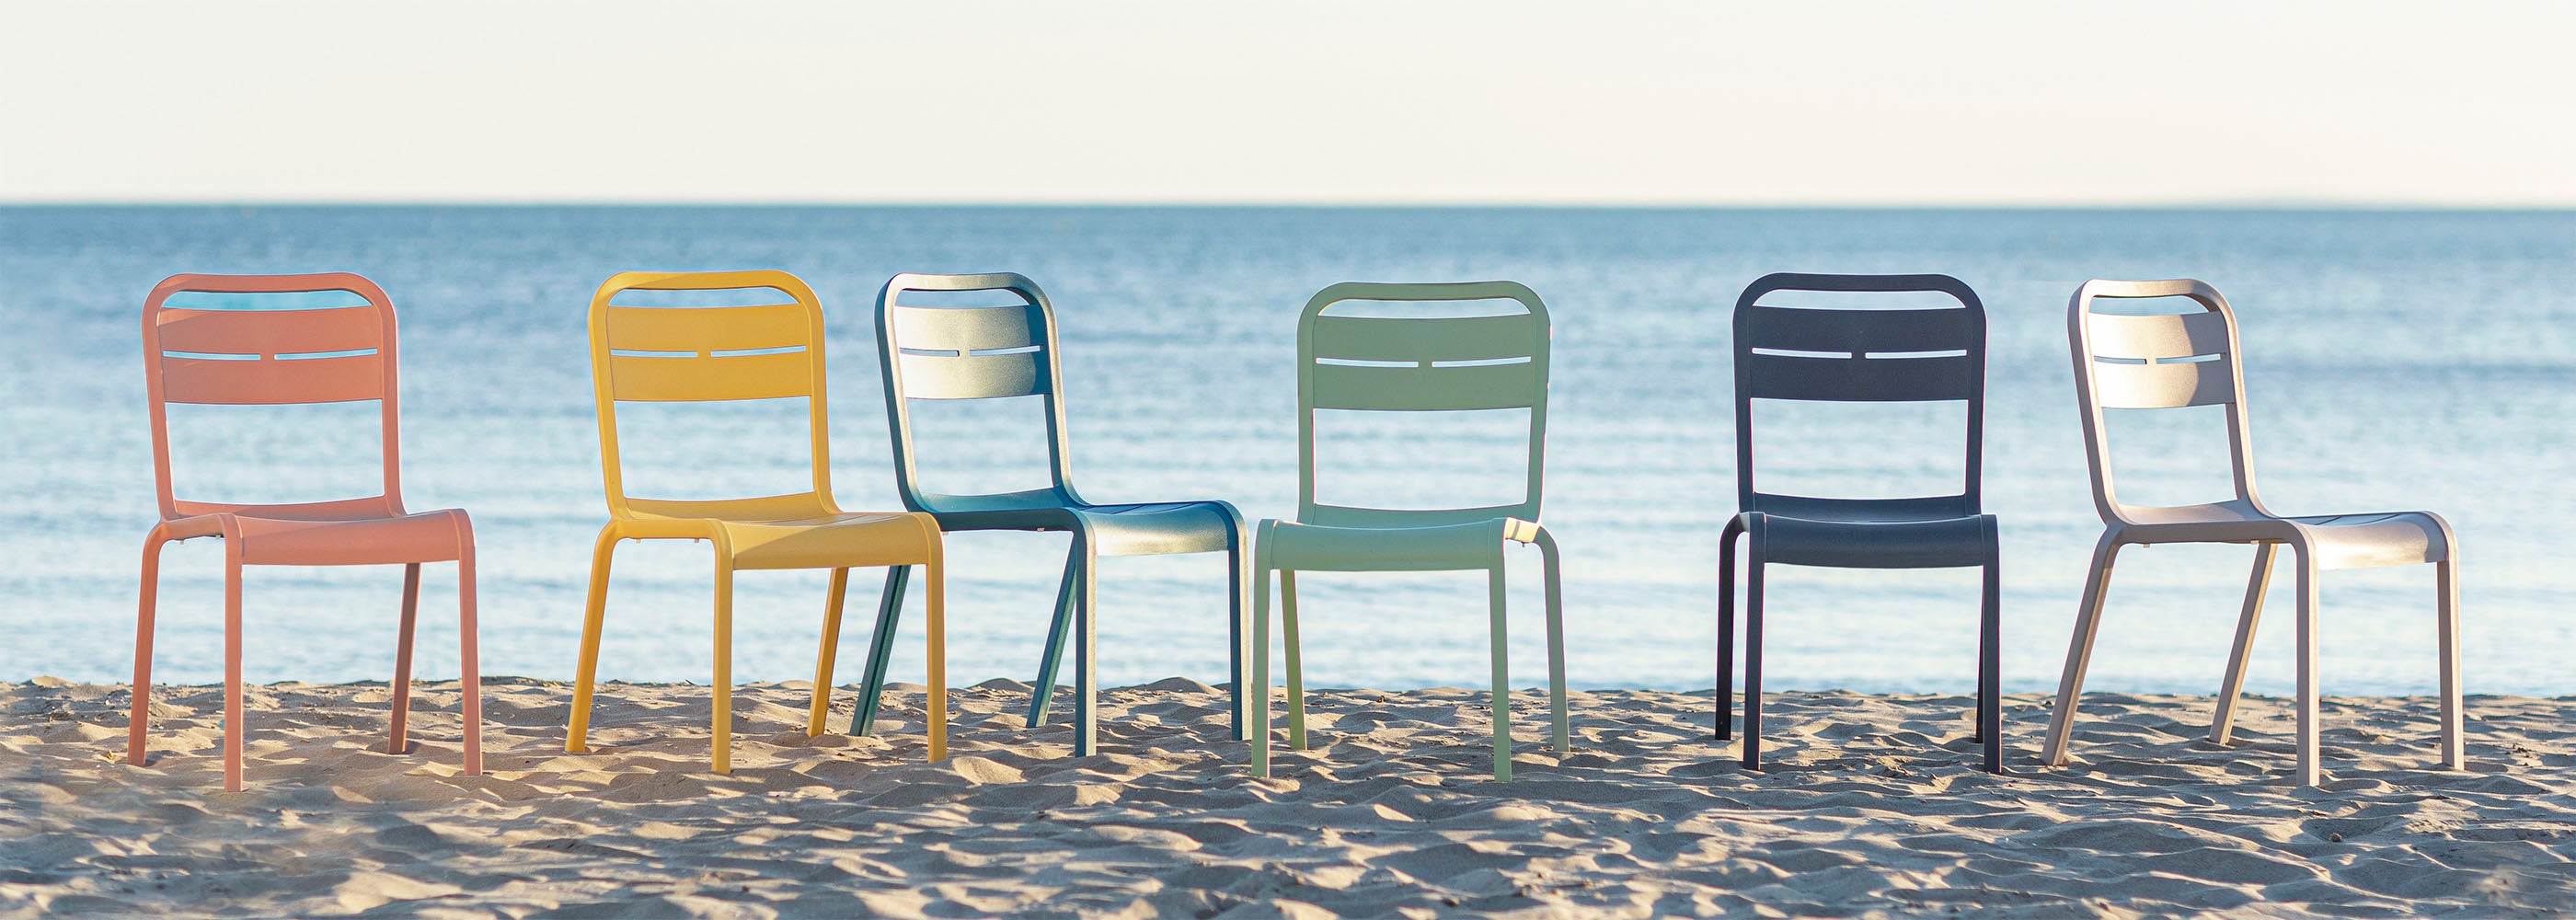 A row of Cannes chairs sit on a beach overlooking the skyline of the ocean